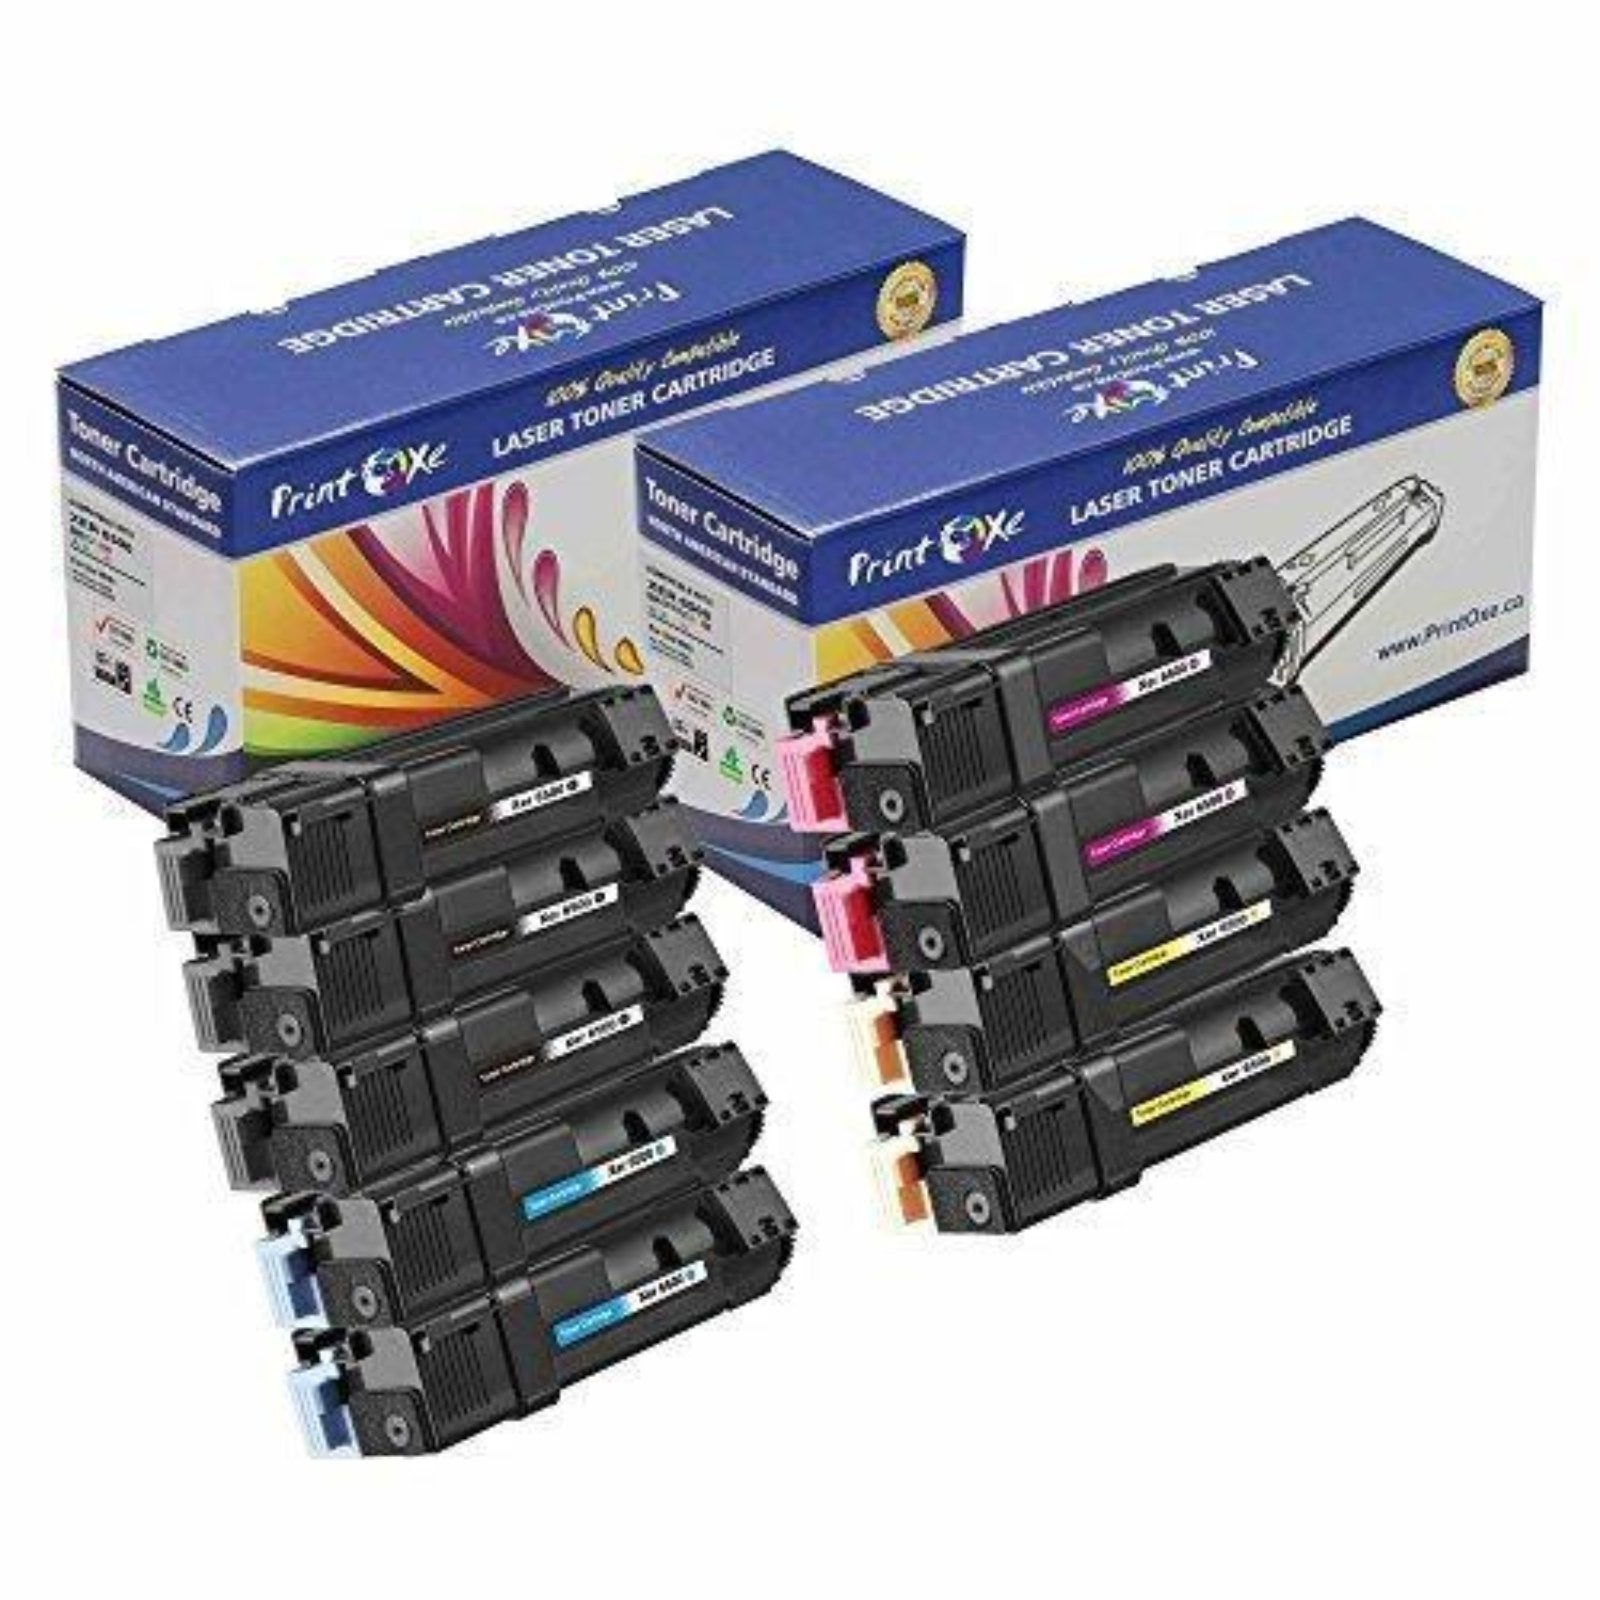 6500 6505 Compatible Phaser WorkCentre Cartridges 106R01597 106R01594  106R01595 106R01596 Sets Black for Xerox Phaser 6500 6500N 6500DN  WorkCentre 6505 Walmart Canada